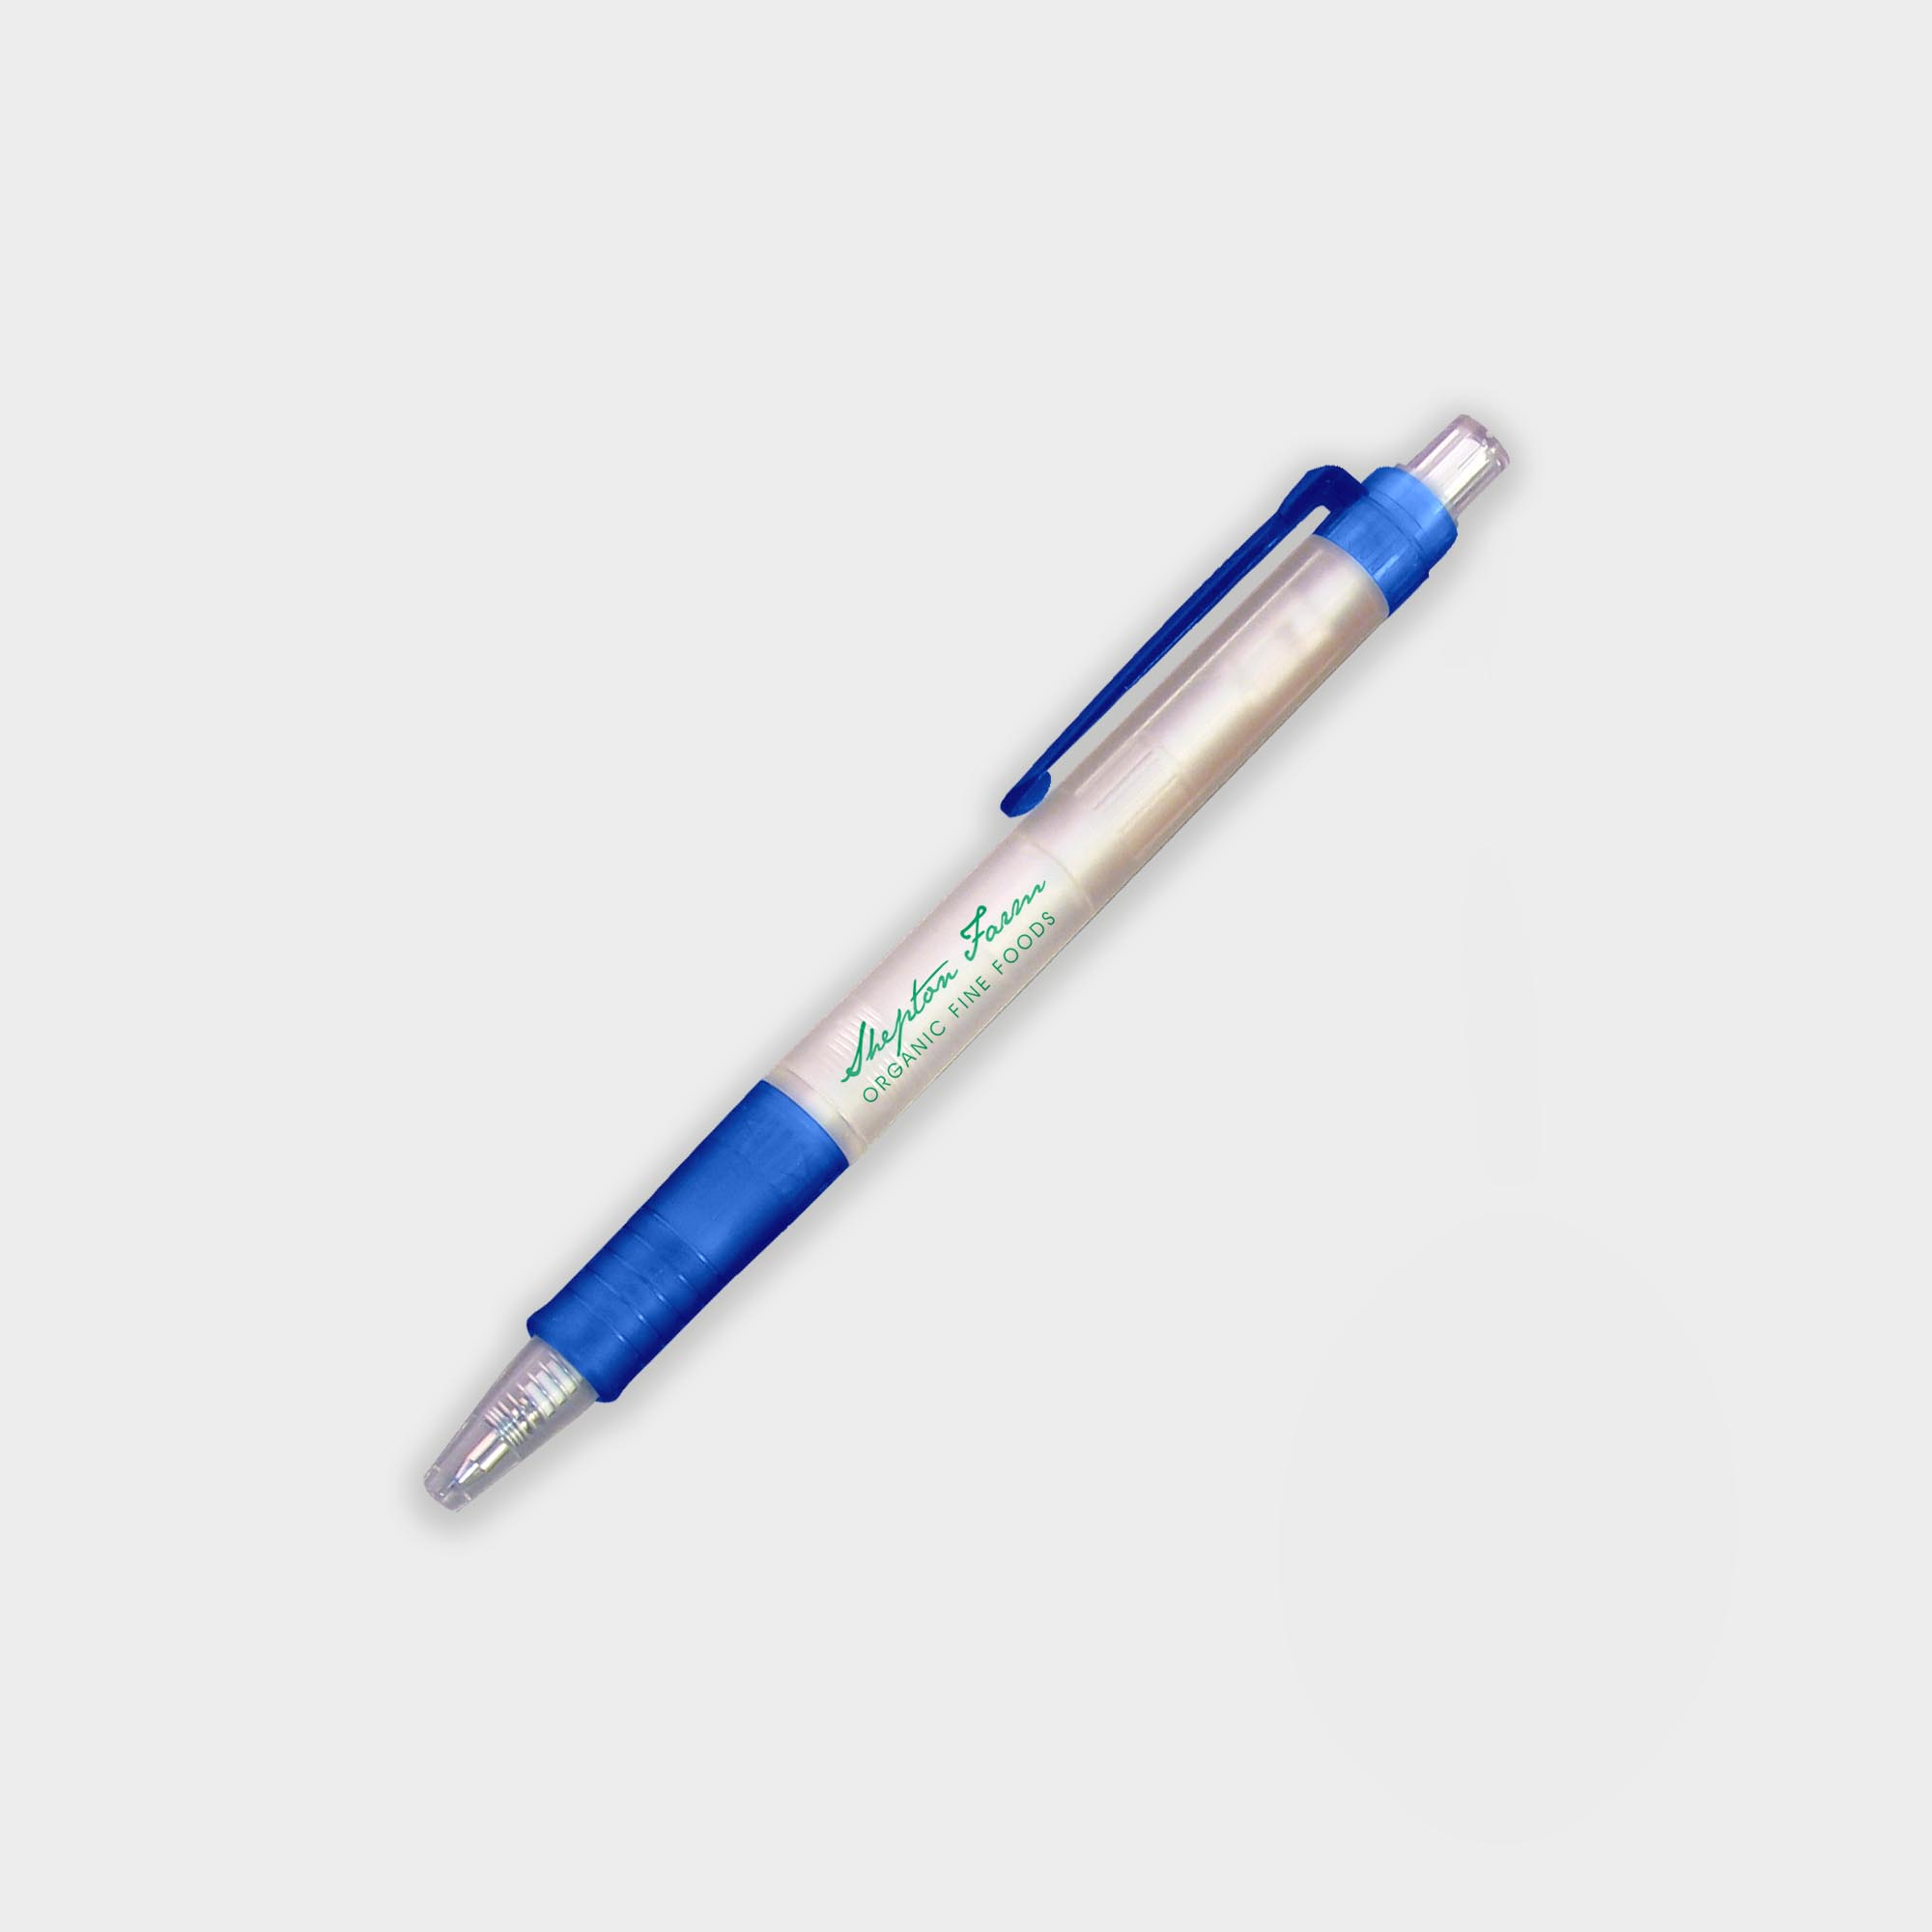 The Green & Good Bio Frost Biodegradable Pen. Corn based plastic pen with a frosted body and a push button. Available in a wide range of trim colours. Black ink as standard. Blue